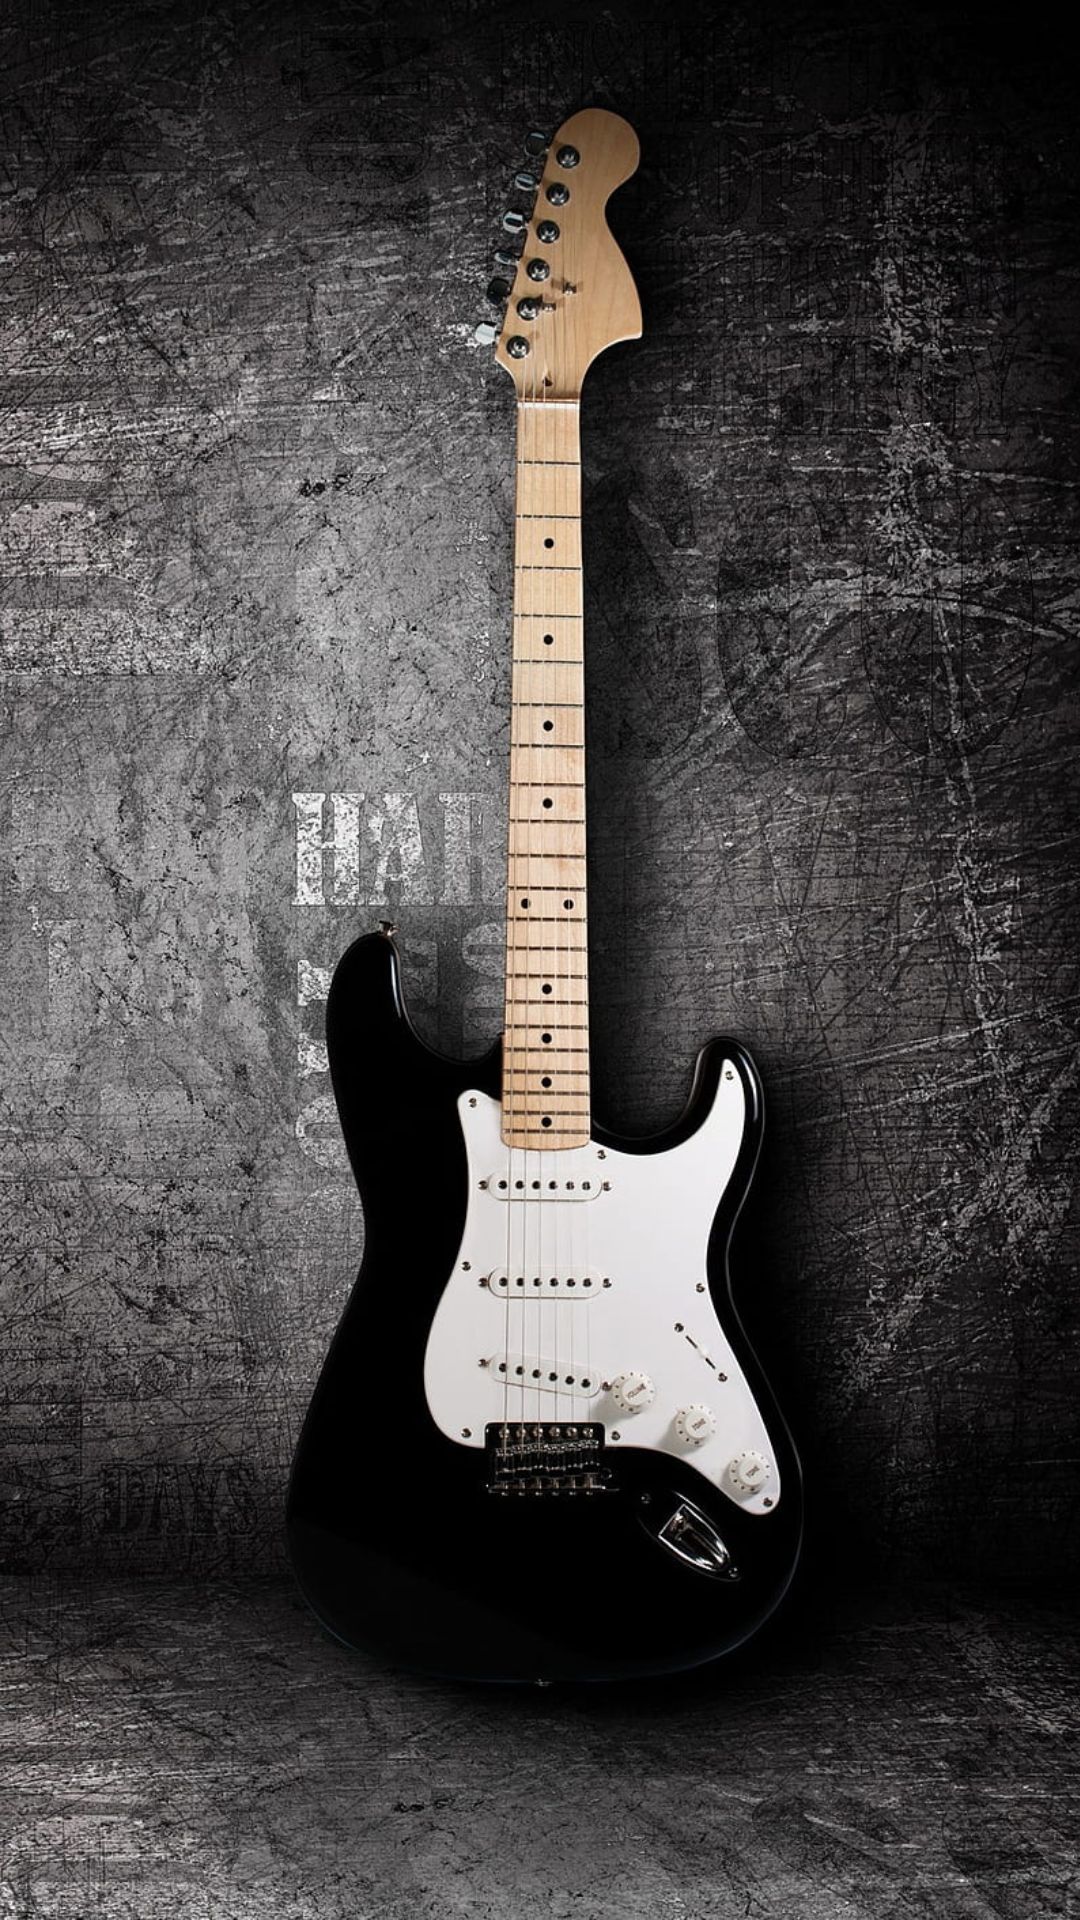 Black Electric Guitar iPhone Wallpaper with high-resolution 1080x1920 pixel. You can use this wallpaper for your iPhone 5, 6, 7, 8, X, XS, XR backgrounds, Mobile Screensaver, or iPad Lock Screen - Guitar